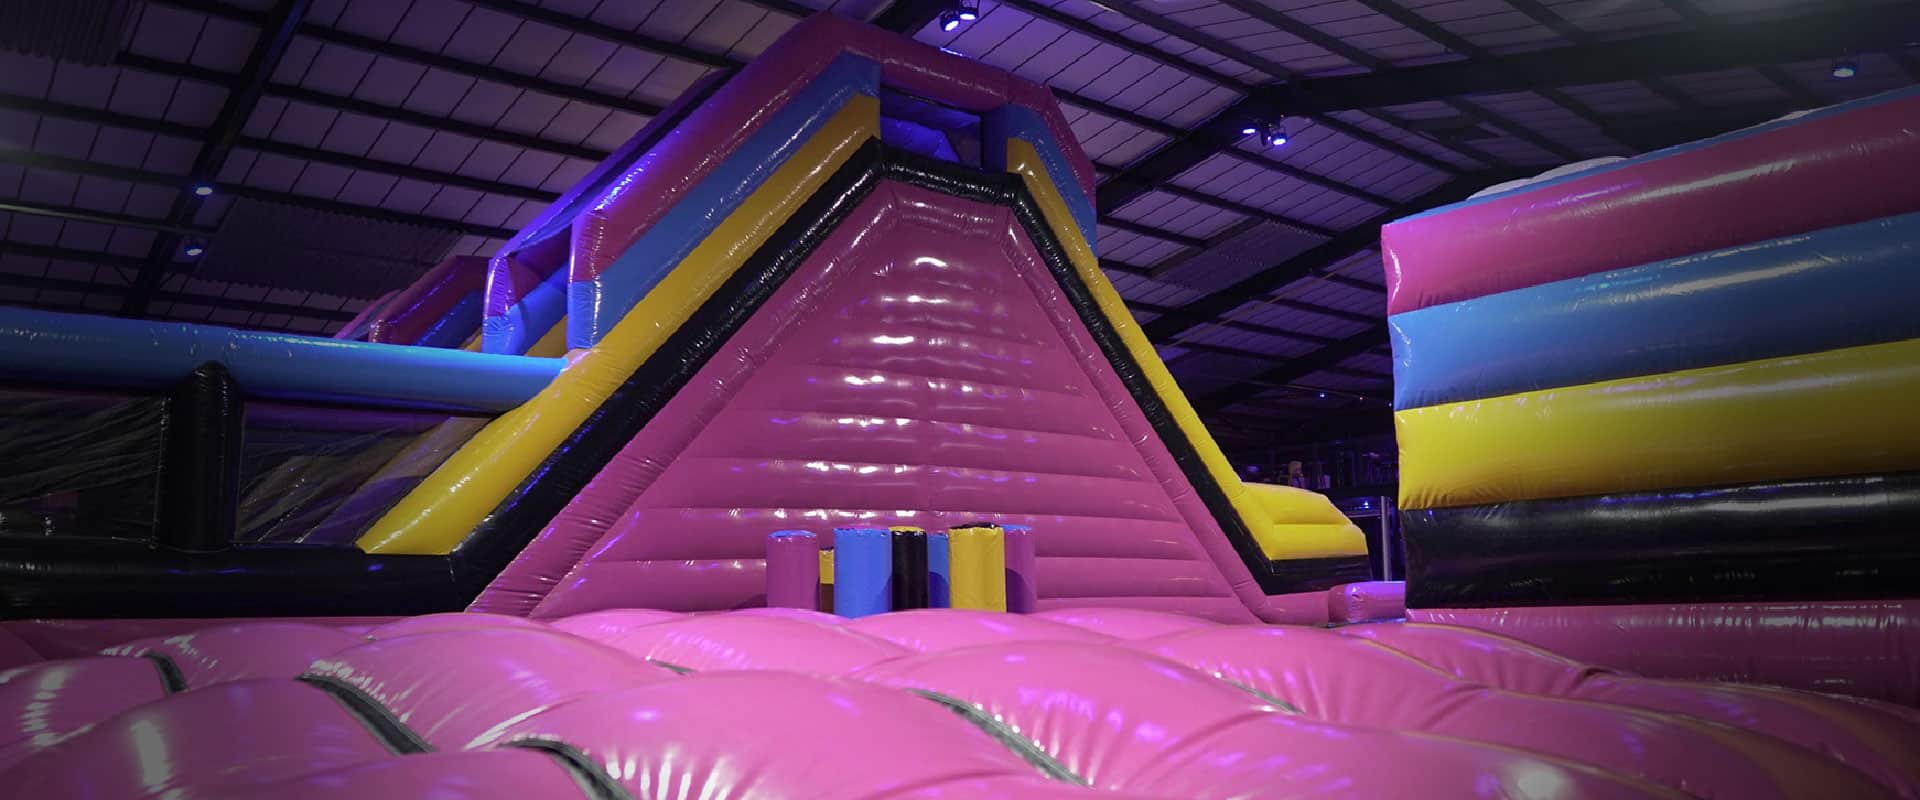 Air Haus - Interactive Inflatable Park in UK